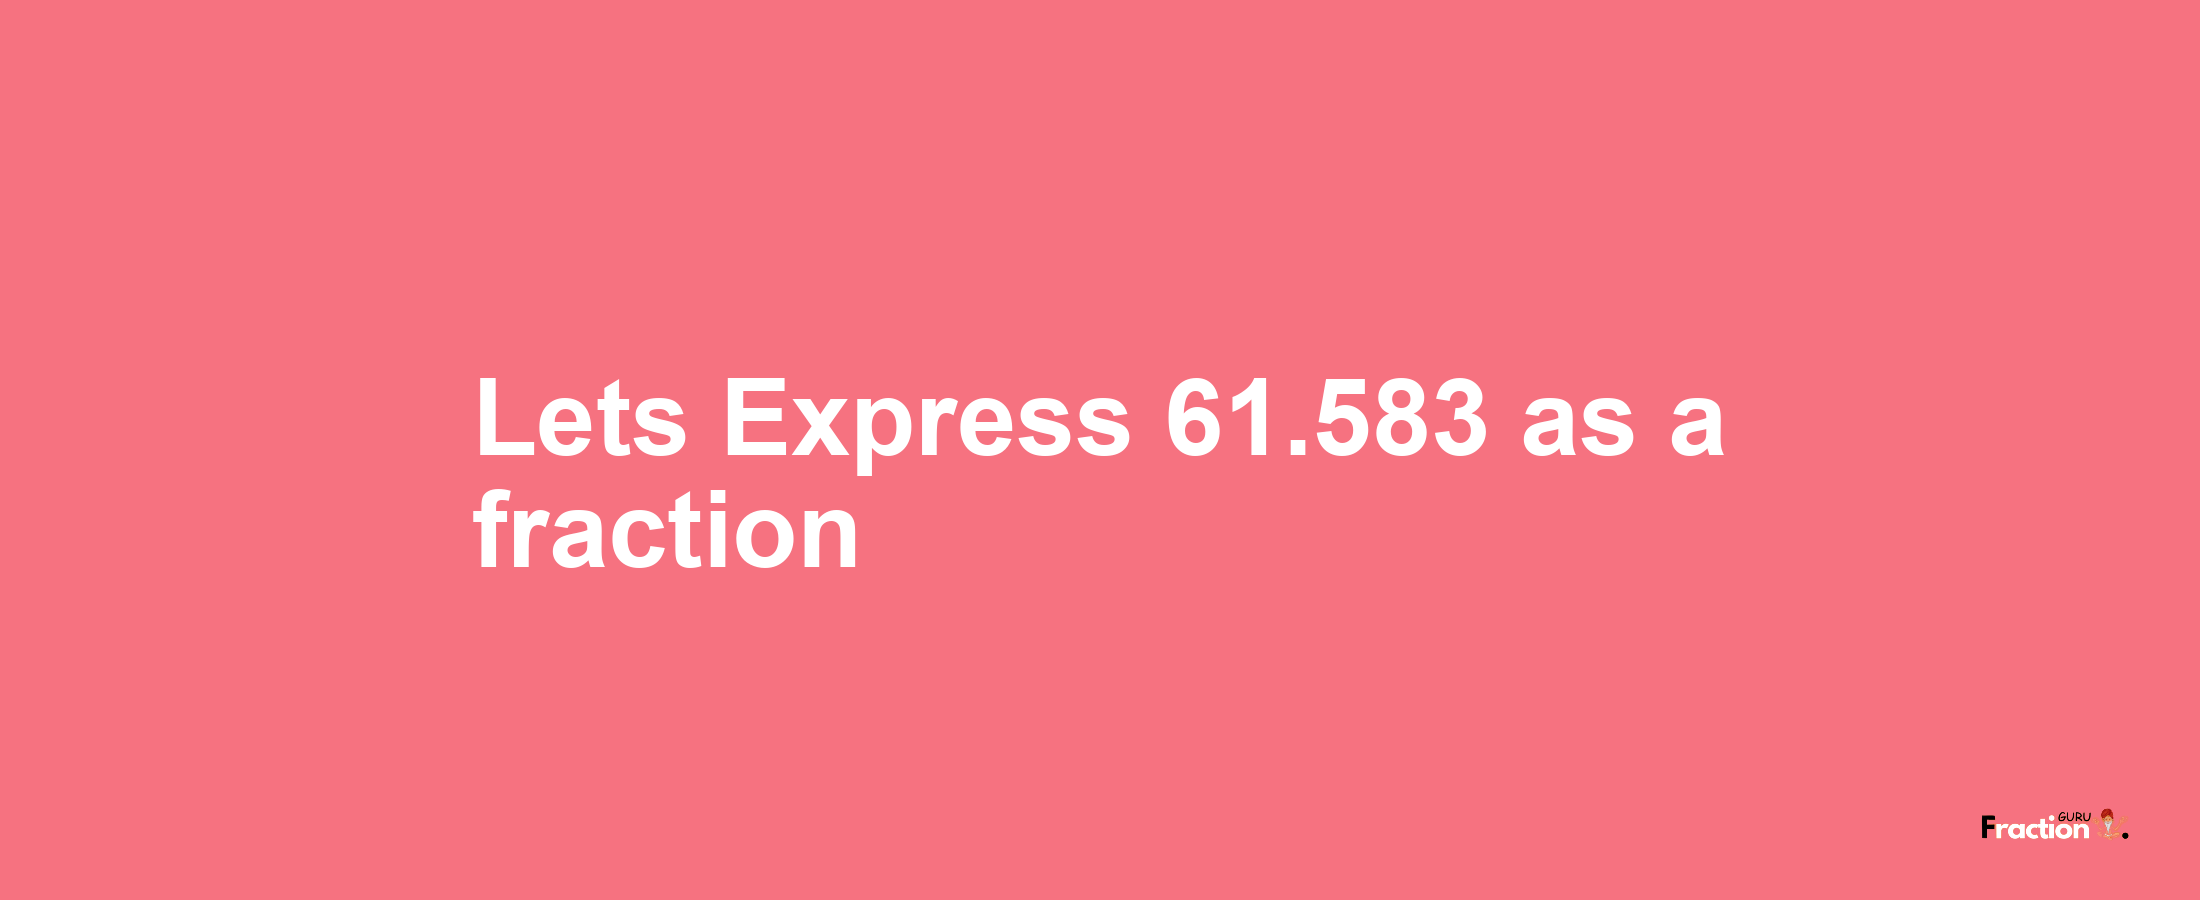 Lets Express 61.583 as afraction